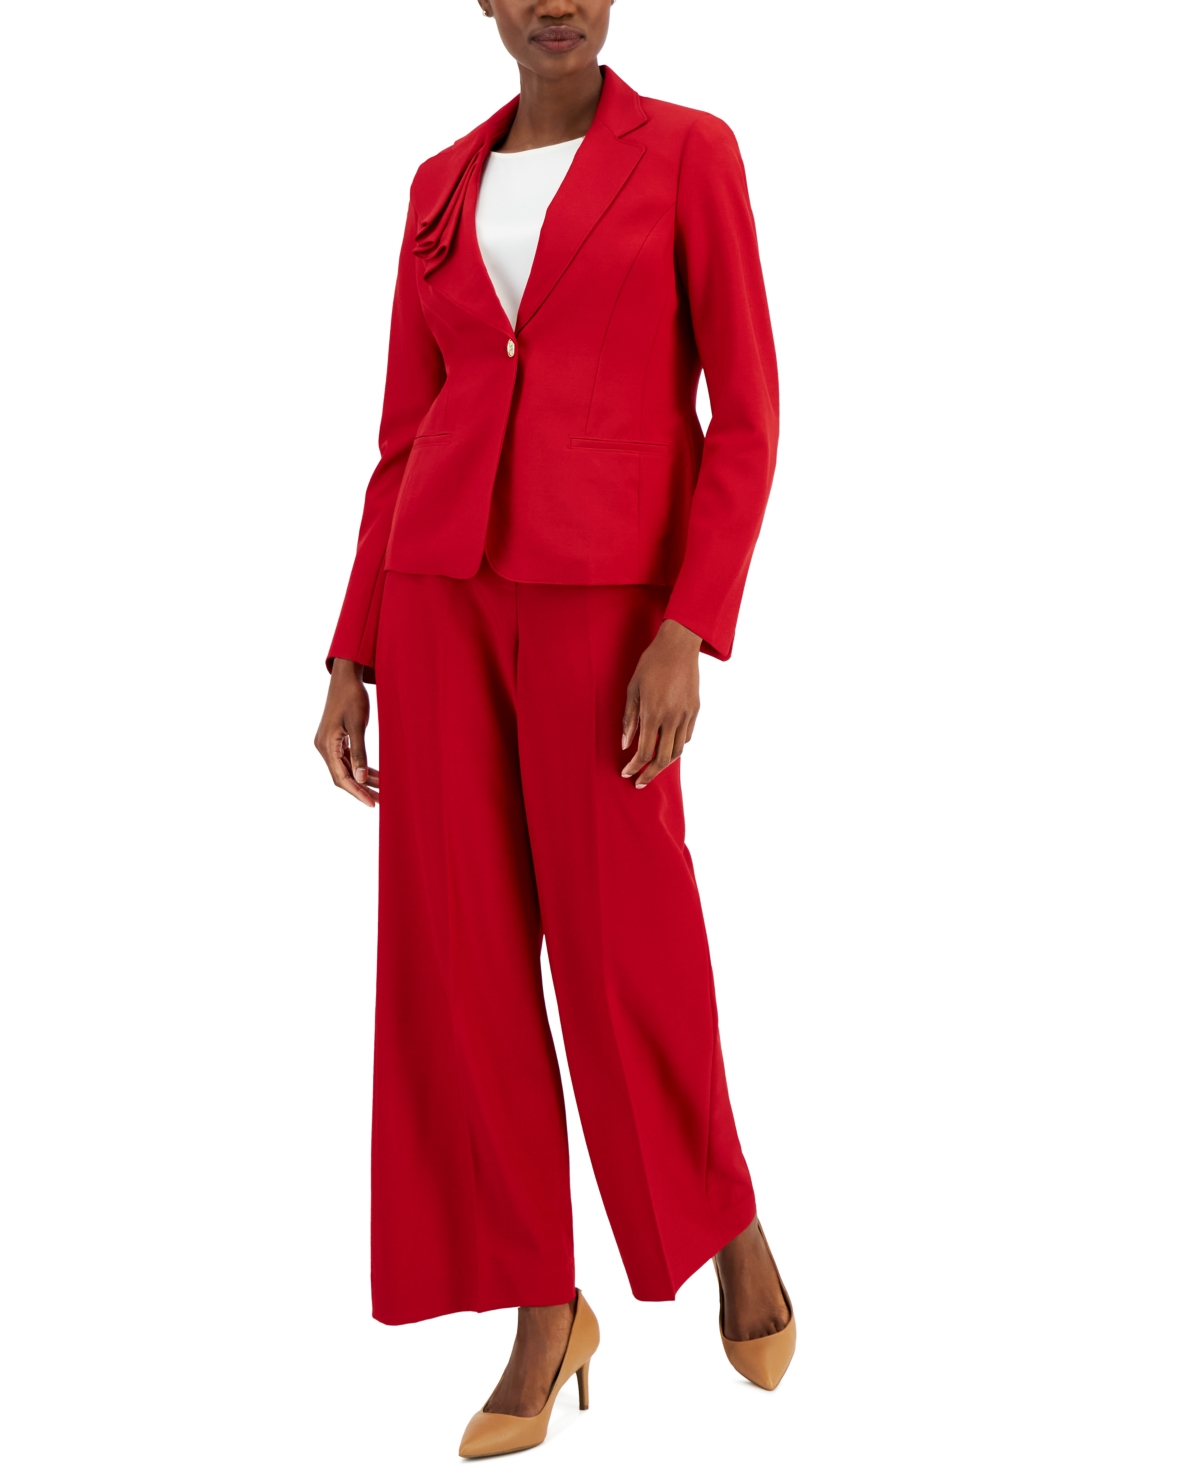 Nipon Boutique Women's Asymmetrical Ruffled One-button Jacket & Wide-leg Pant Suit In Classic Red